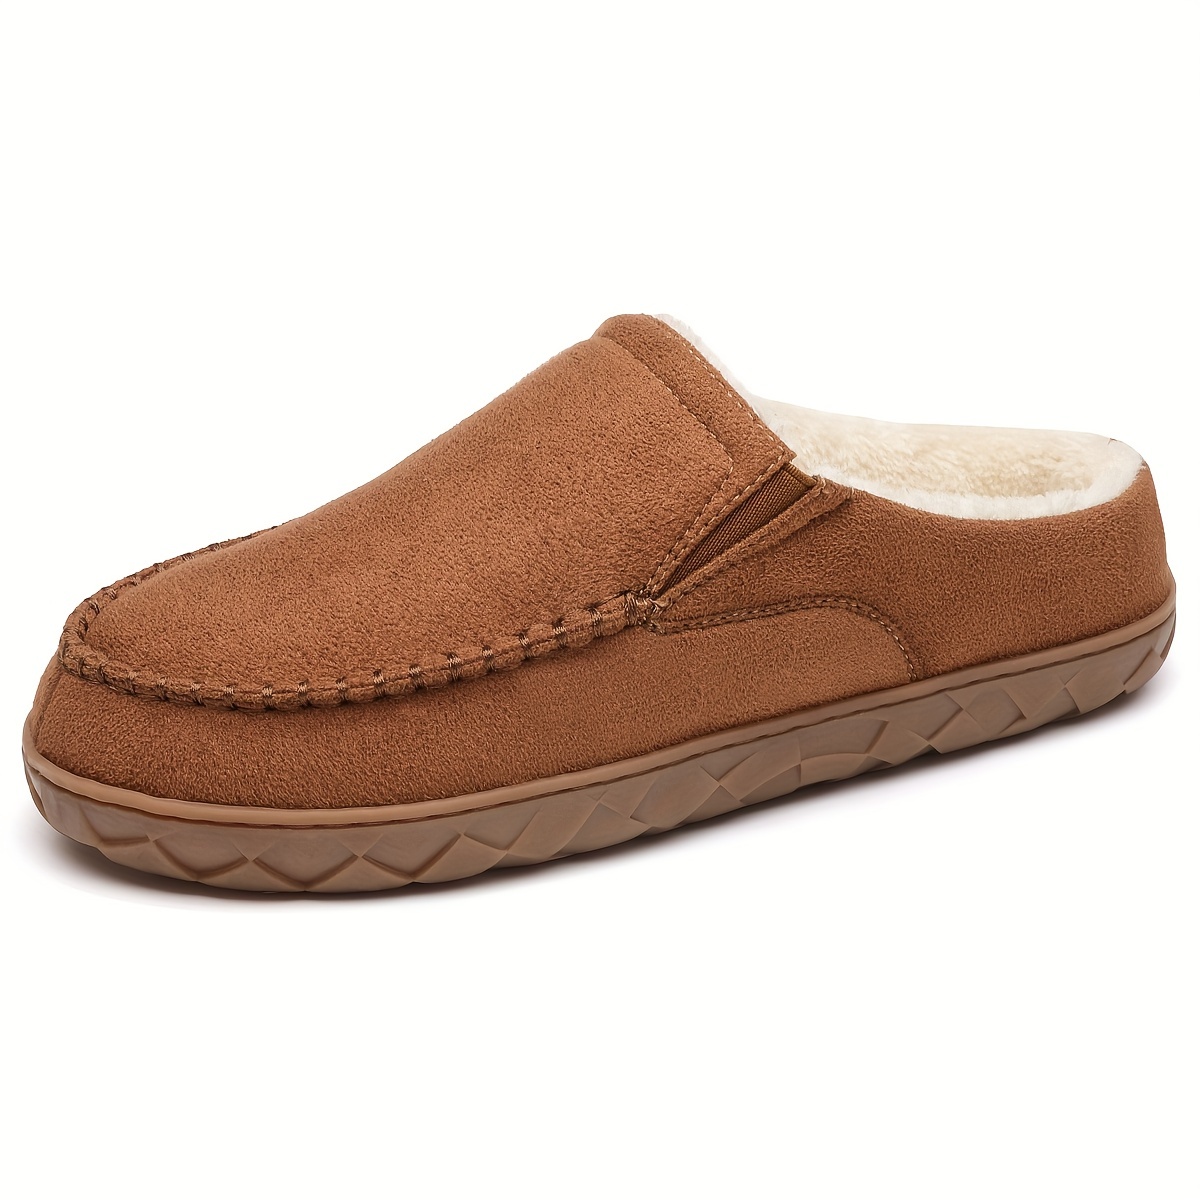 moccasin house slippers men s soft plush cozy lightweight